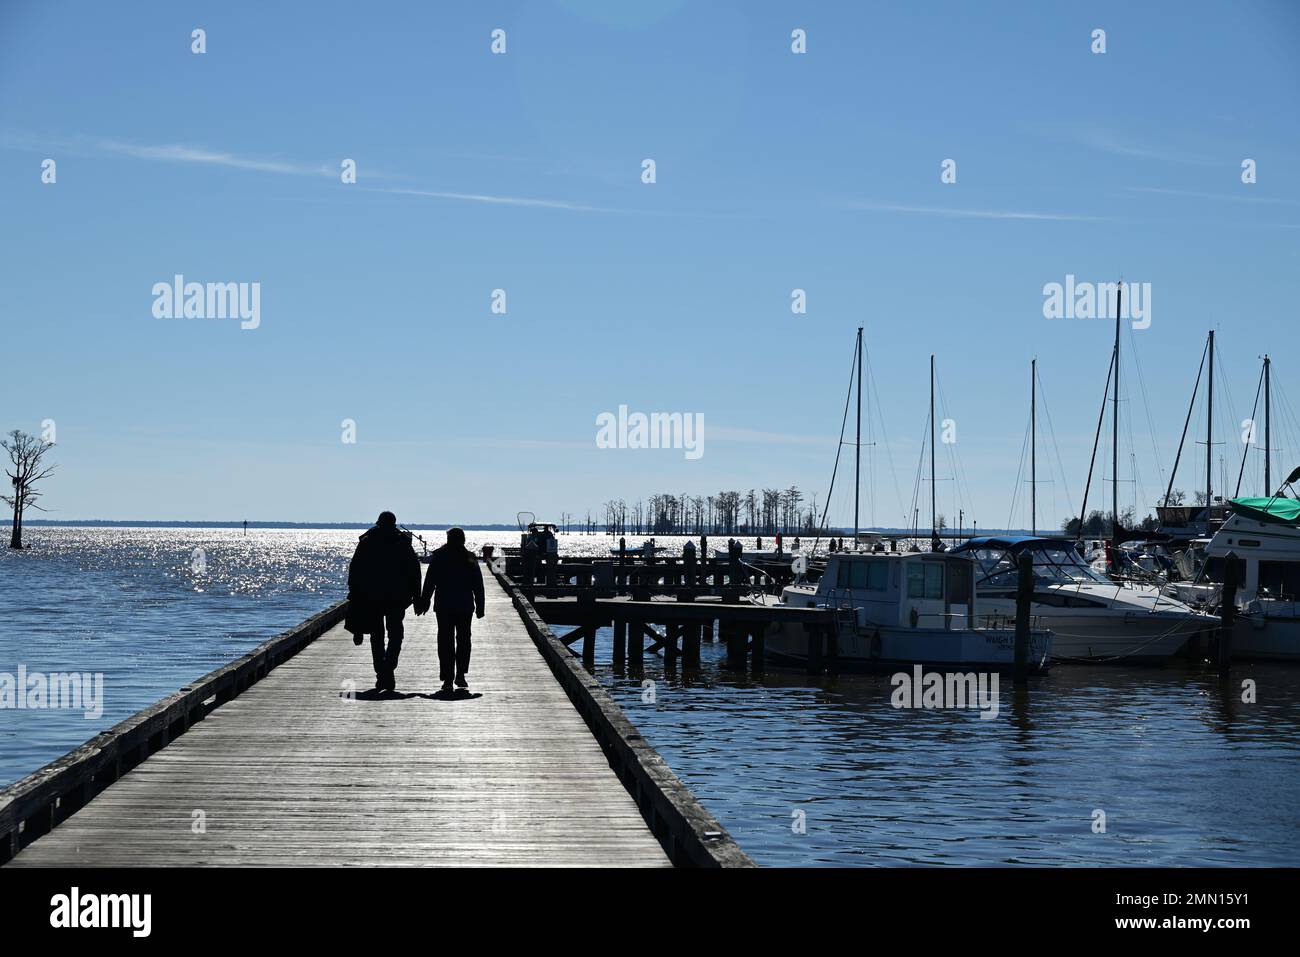 A couple holds hands is silhouetted while walking down a wooden boat dock. Stock Photo